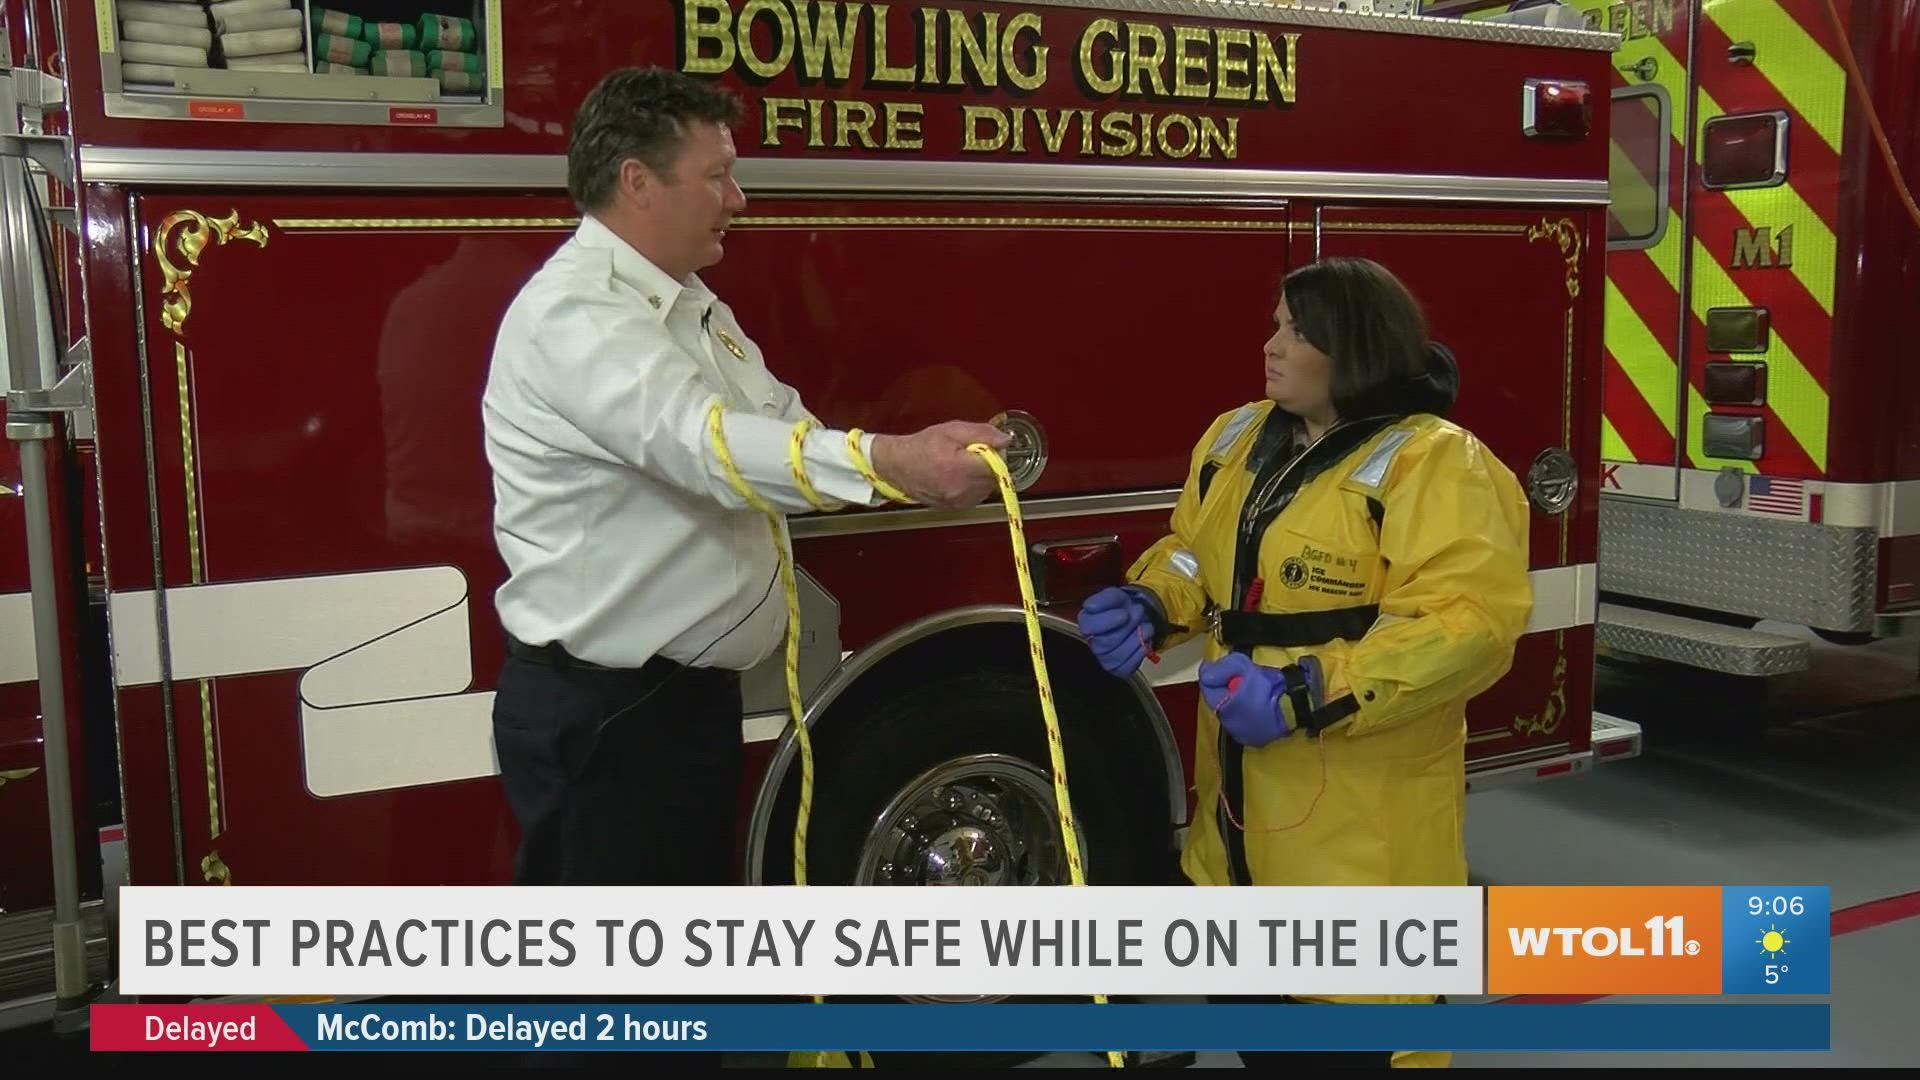 We hear from a local fire department on ways to stay safe and what to avoid when on the ice.